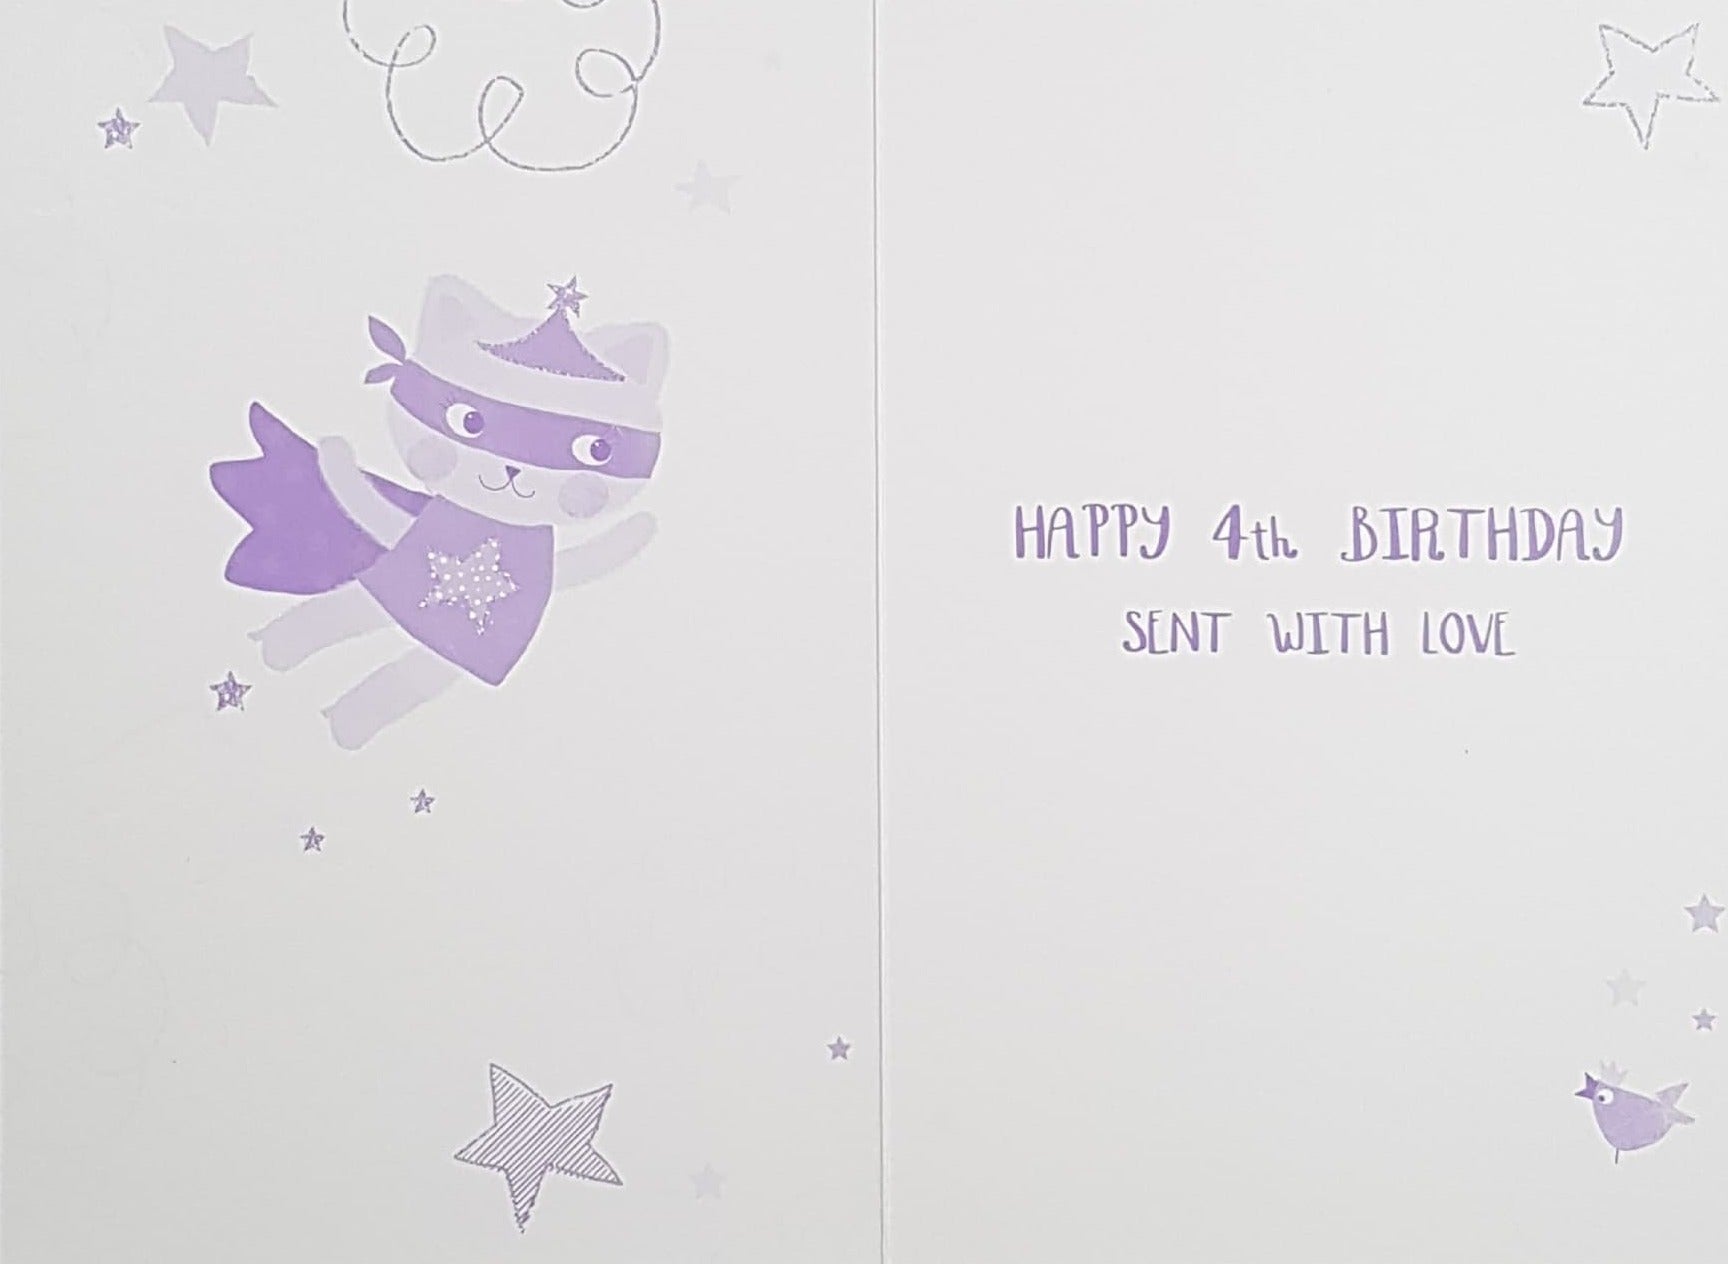 Age 4 Birthday Card - A Super Hero White Kitten With A Purple Cape ( With Stickers)